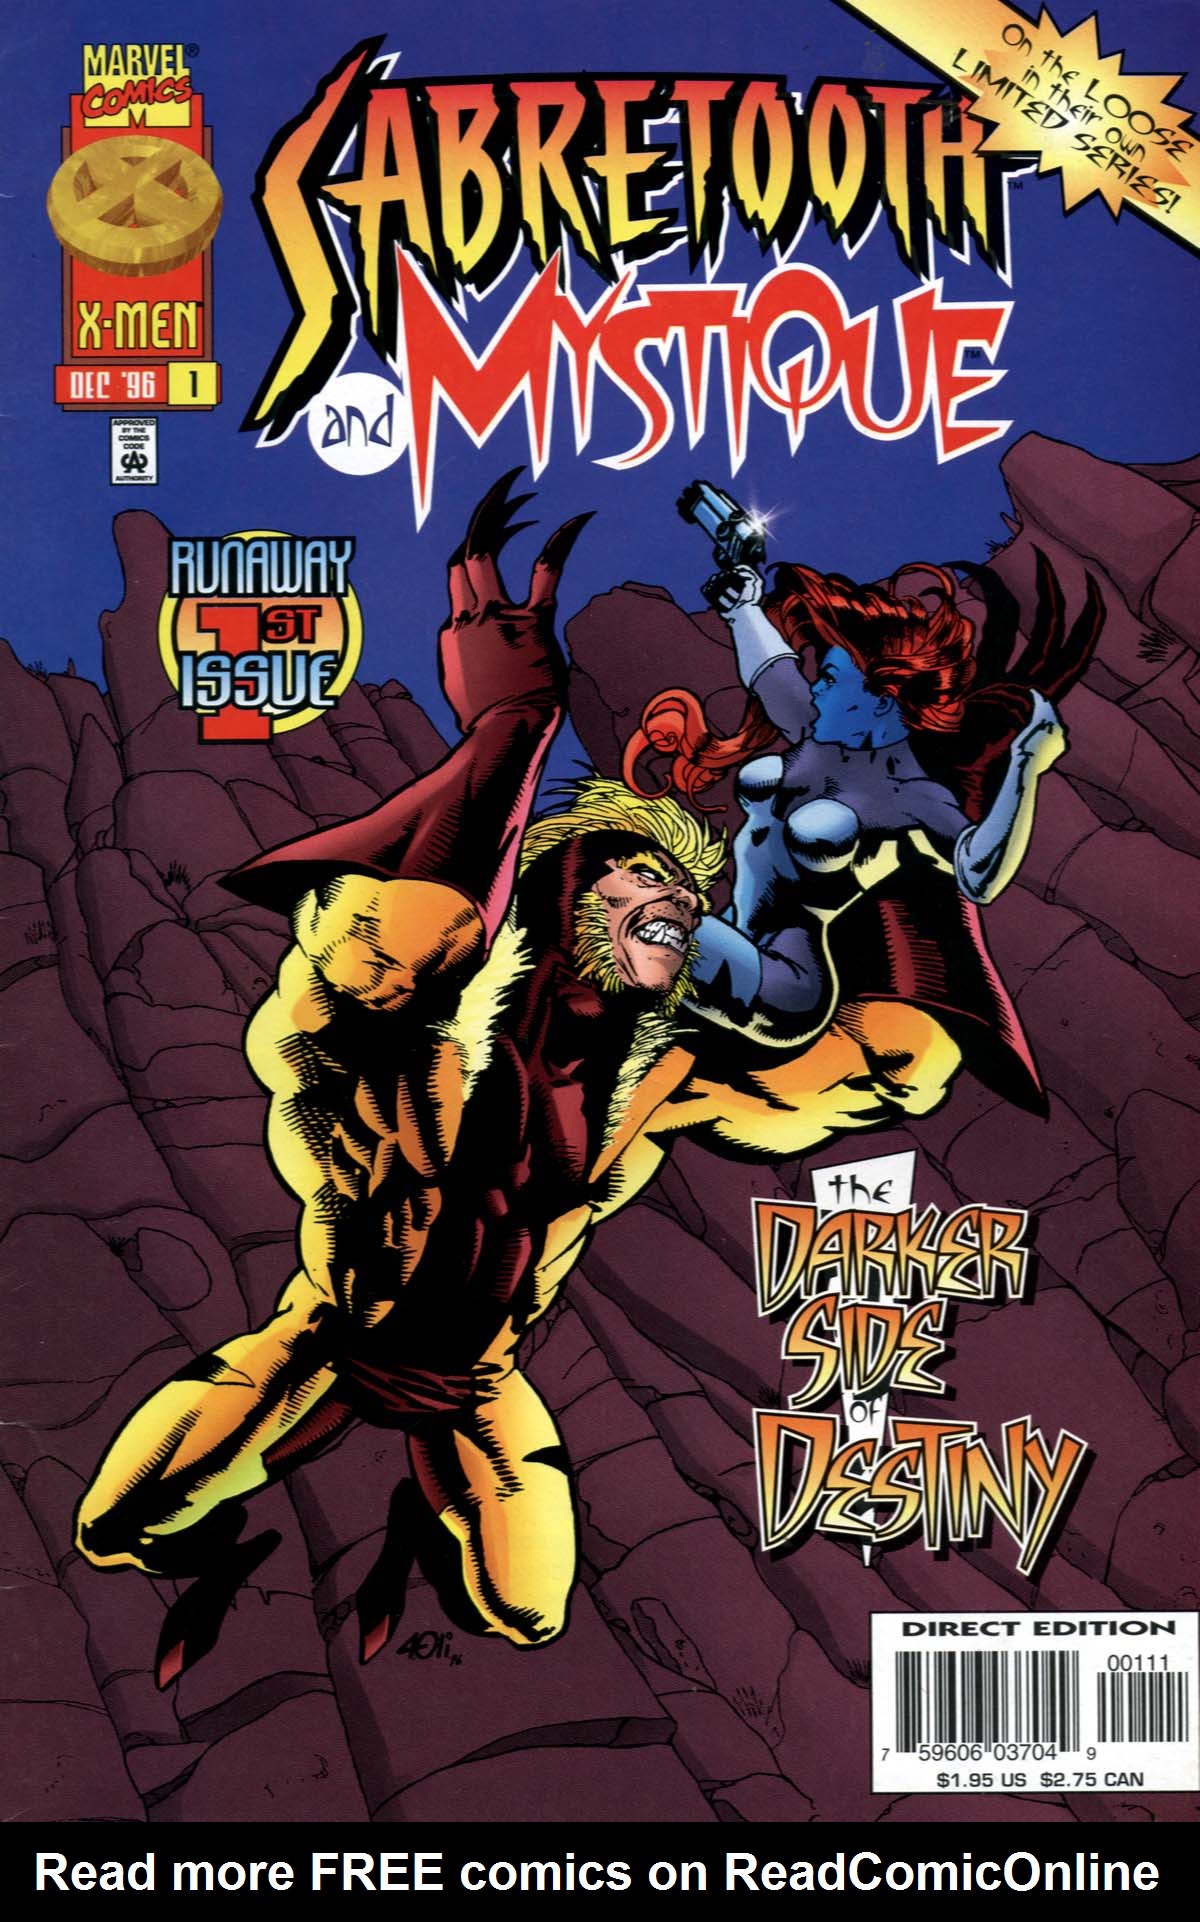 Read online Sabretooth and Mystique comic -  Issue #1 - 1